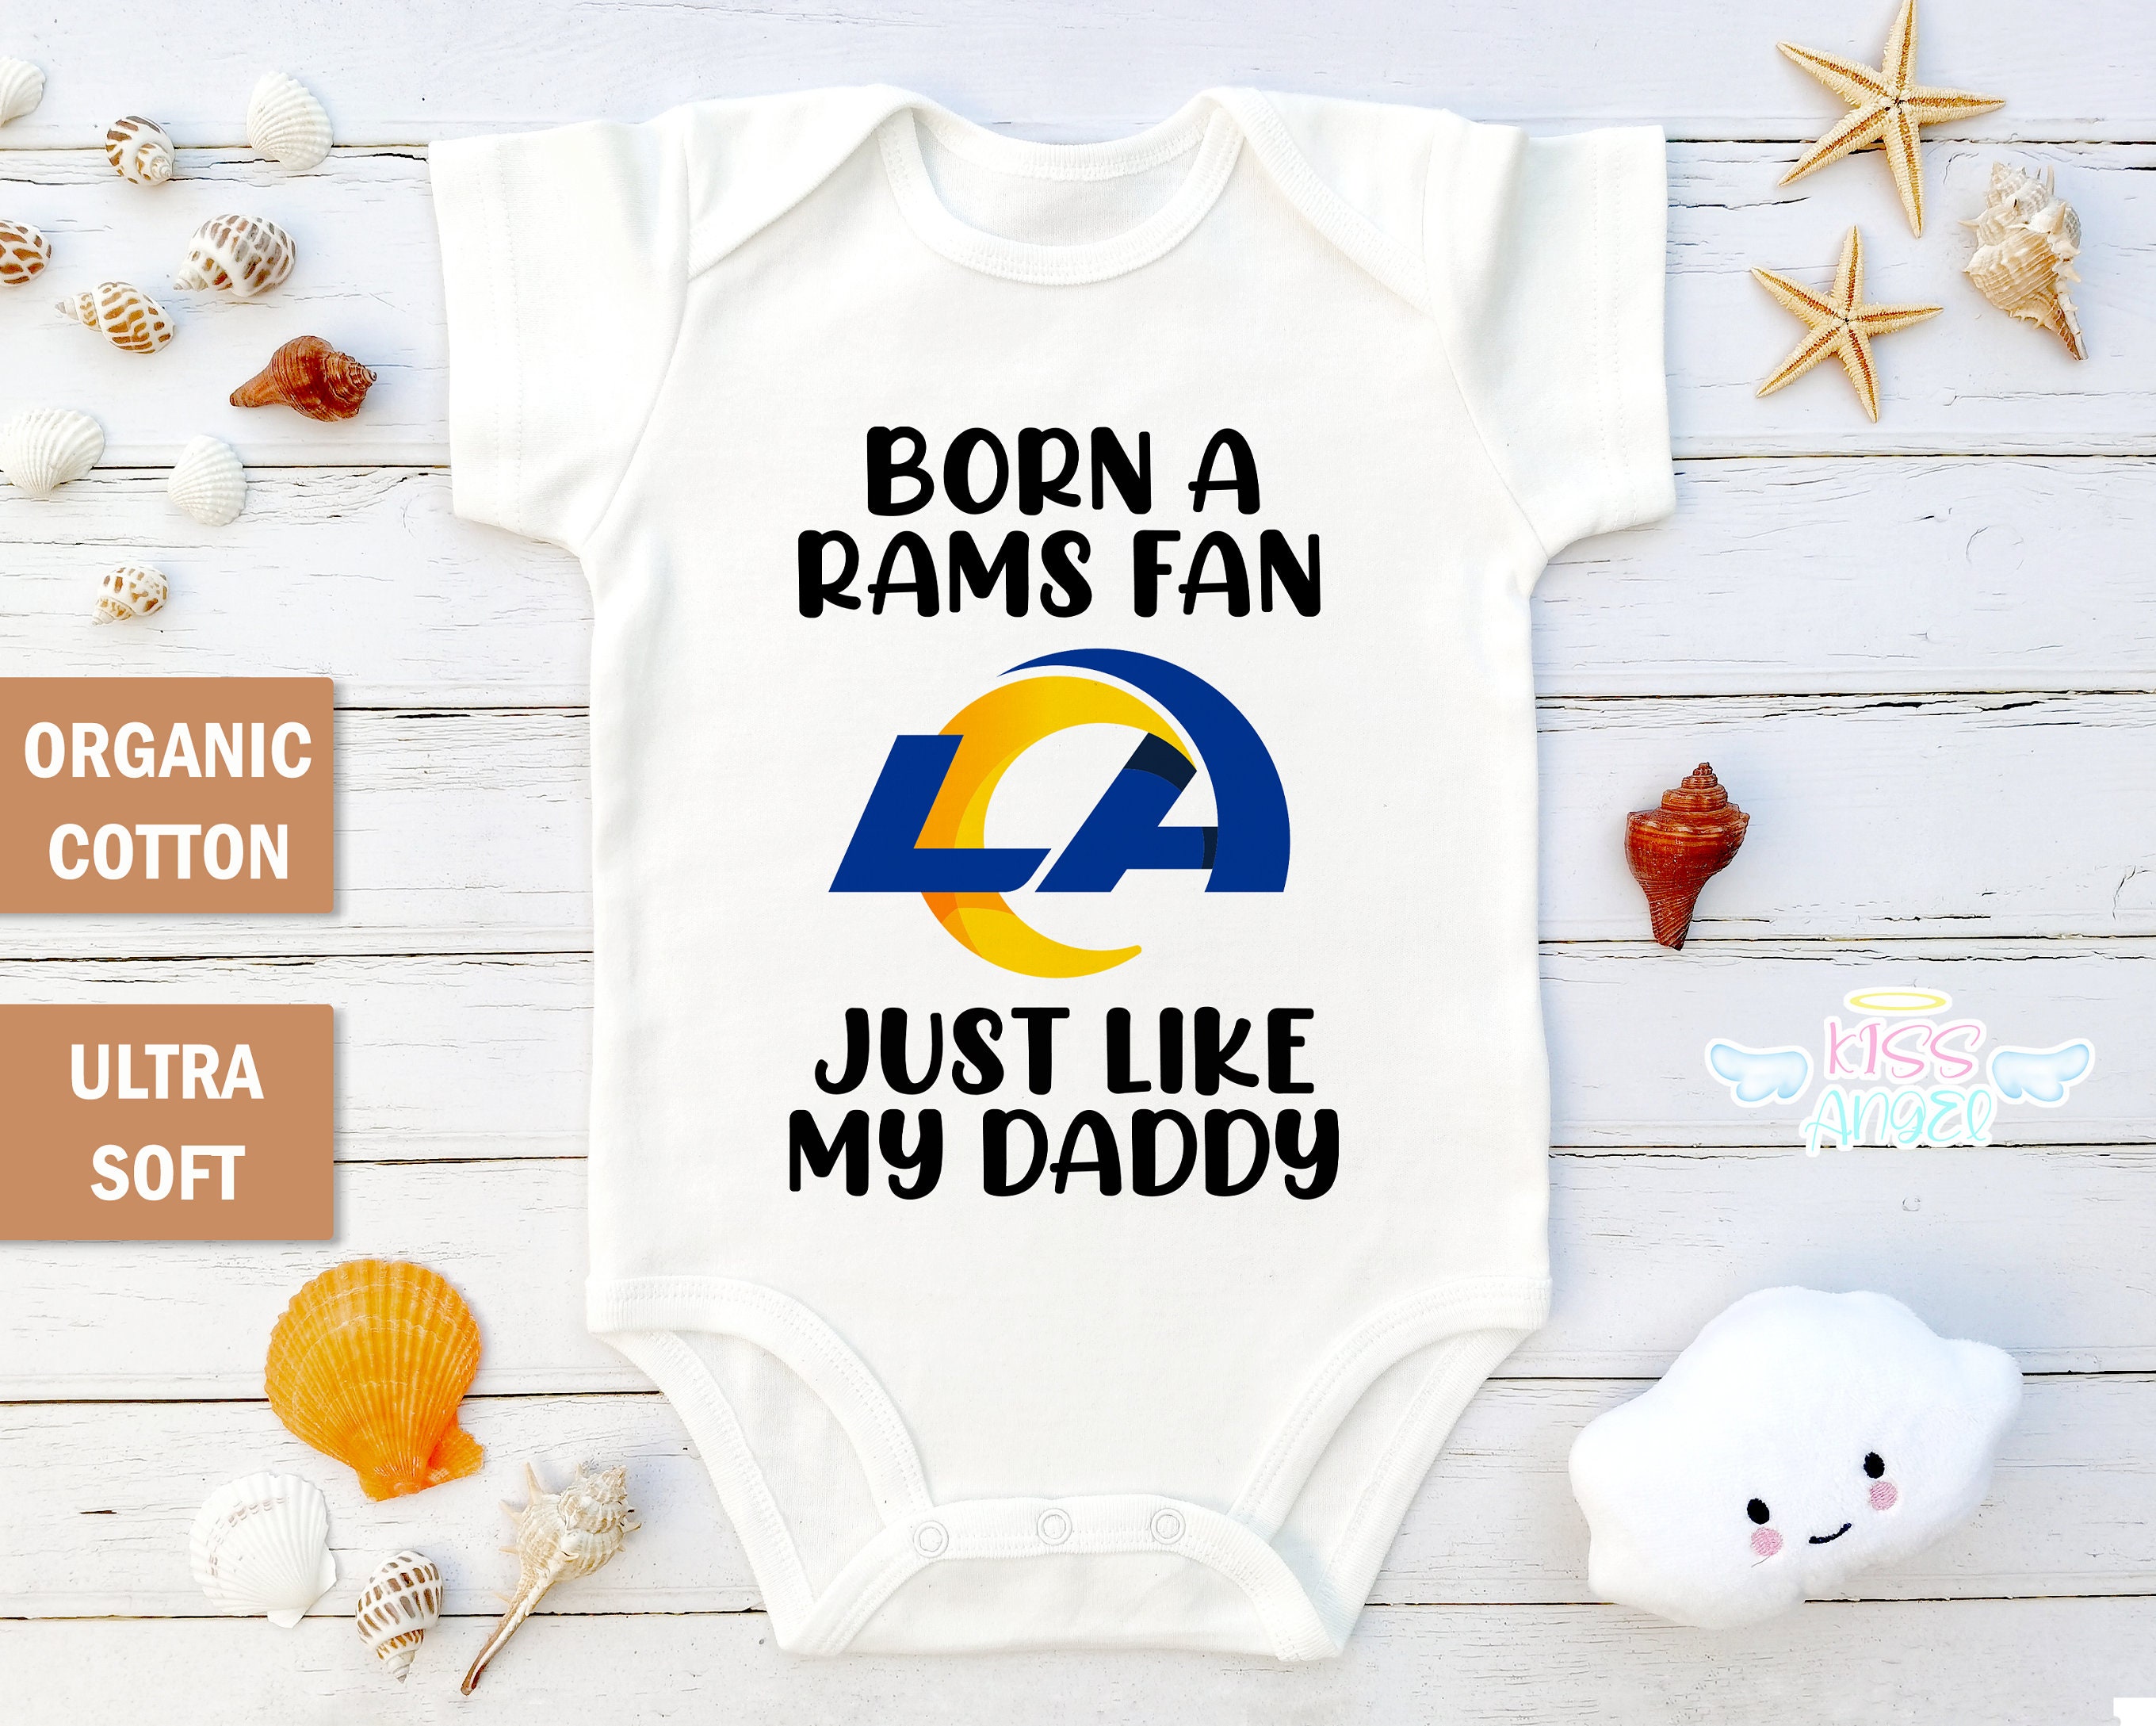 Born A Rams Fan, Los Angeles Baby Outfit, Bodysuit, Toddler Shirt, Nfl Baby, Organic Clothes